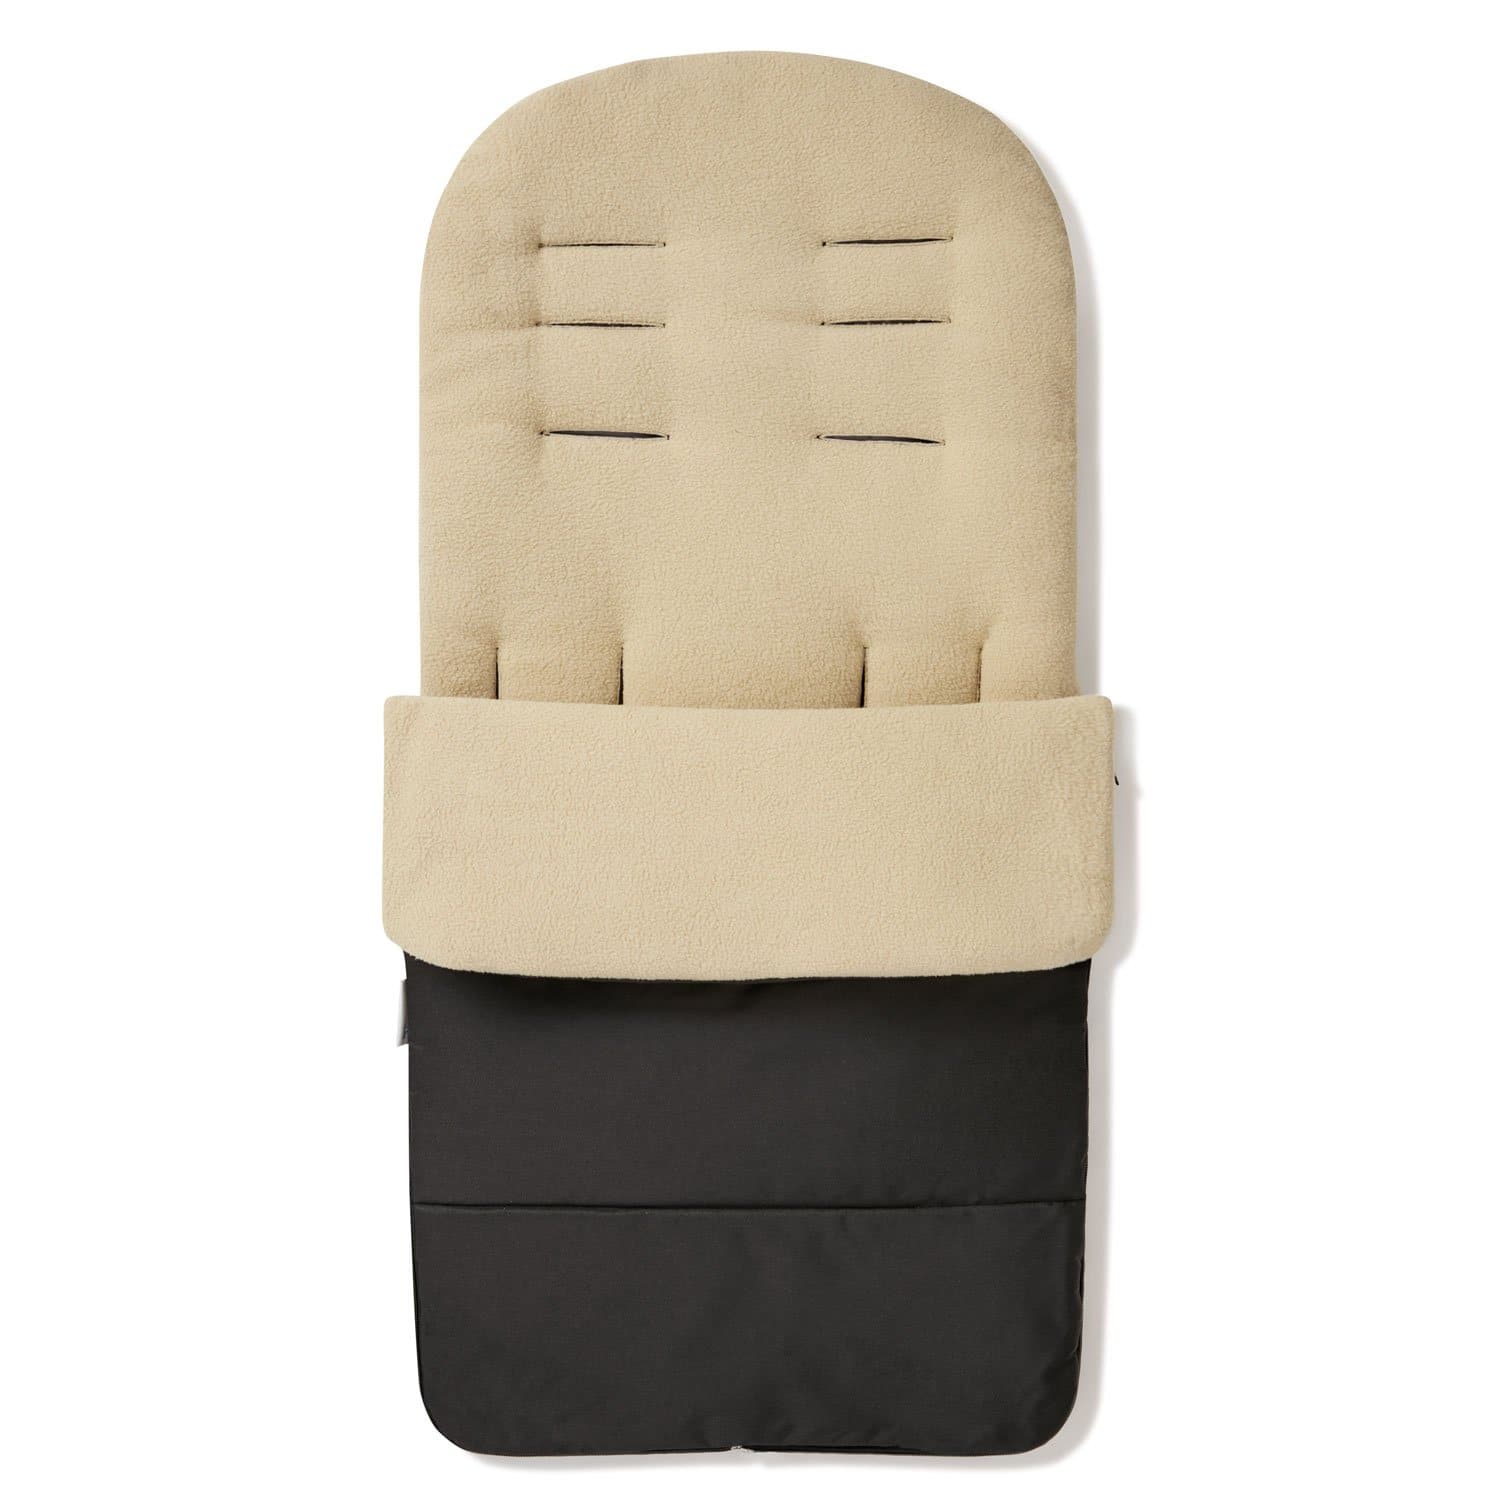 Premium Footmuff / Cosy Toes Compatible with BabyCare - Desert Sand / Fits All Models | For Your Little One